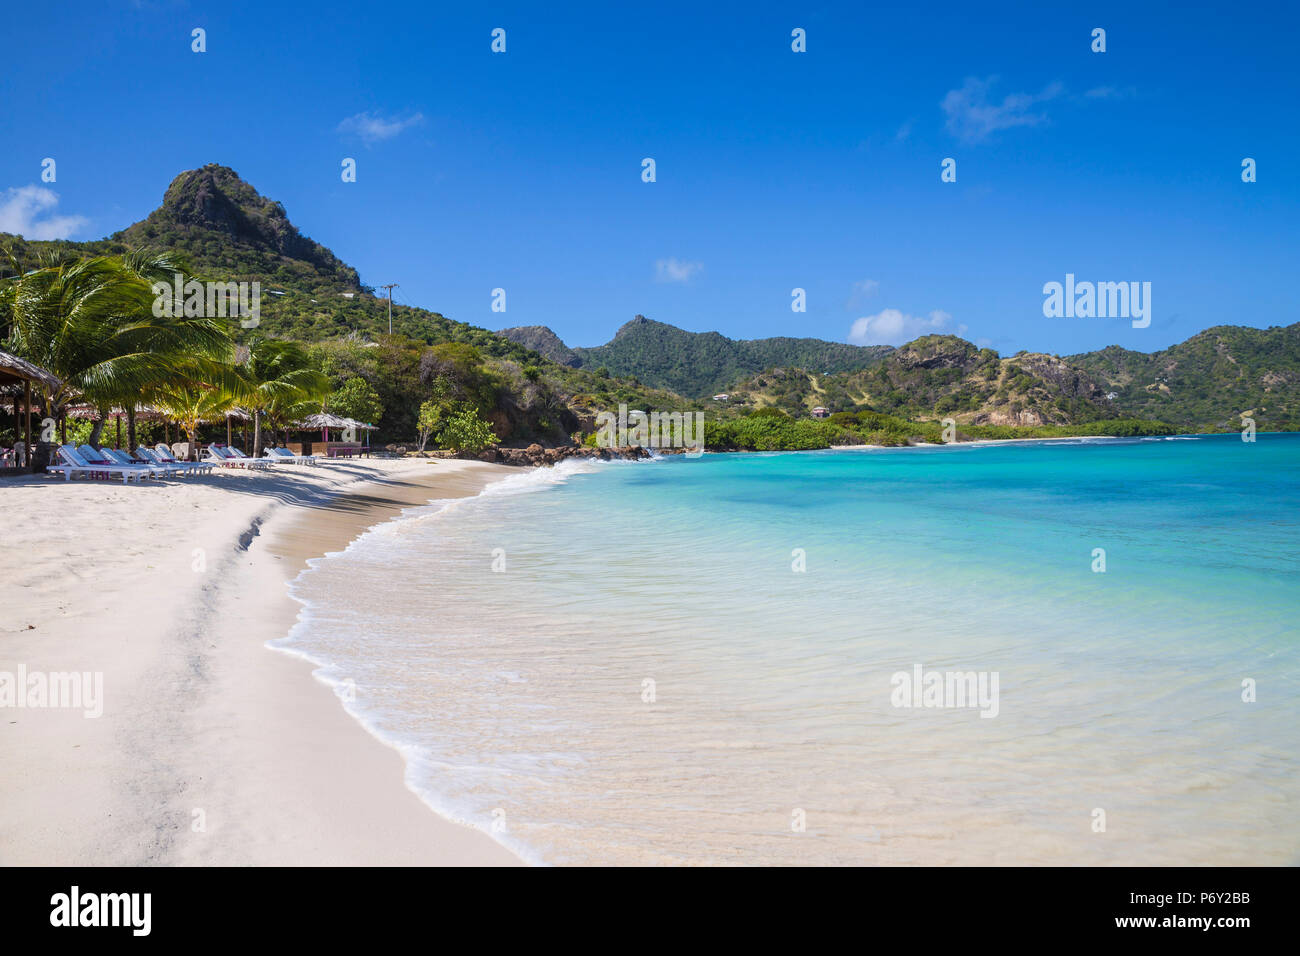 St Vincent and The Grenadines, Union Island, Big Sands beach at Belmont Bay Stock Photo